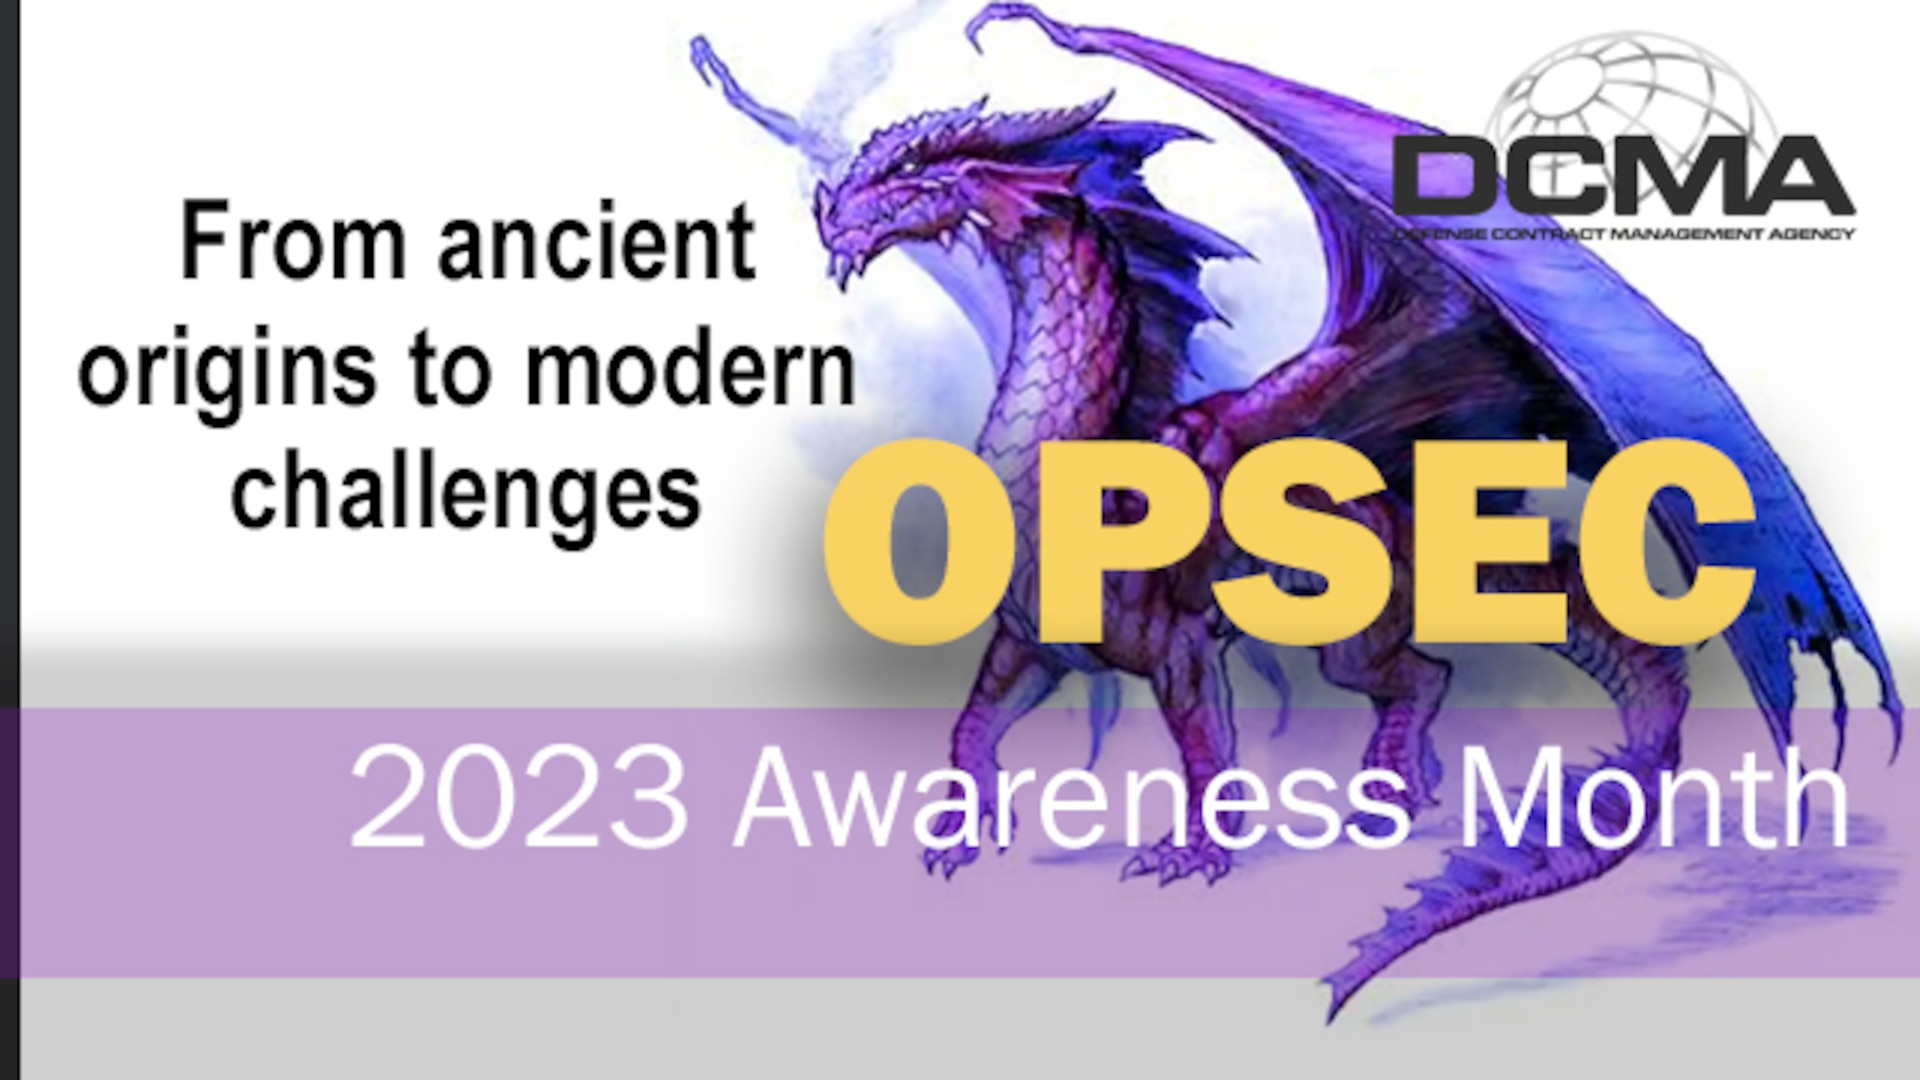 OPSEC Awareness Month; from ancient origins to modern challenges